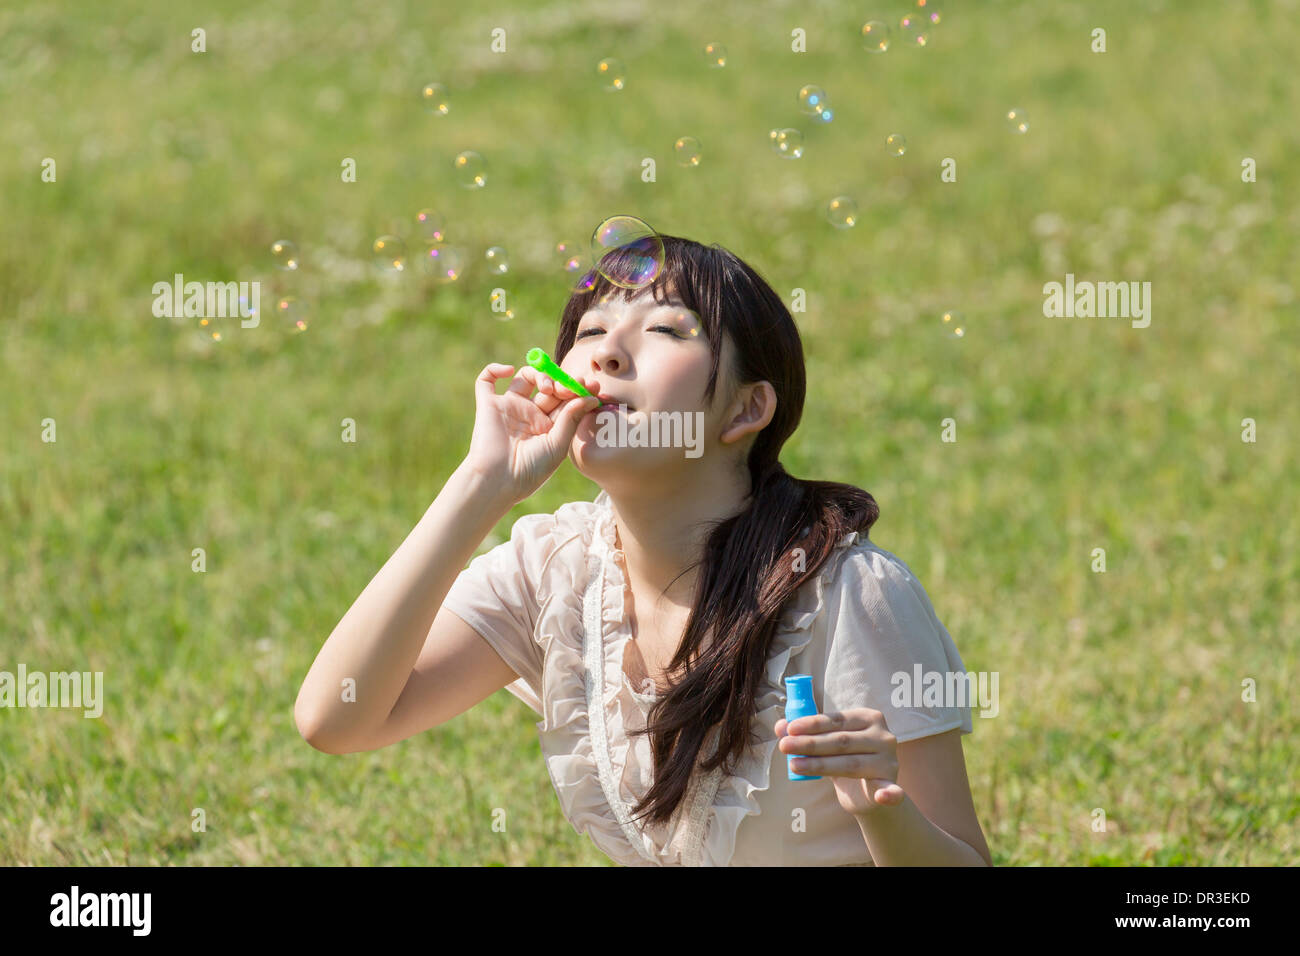 Young woman playing with bubble wand Stock Photo